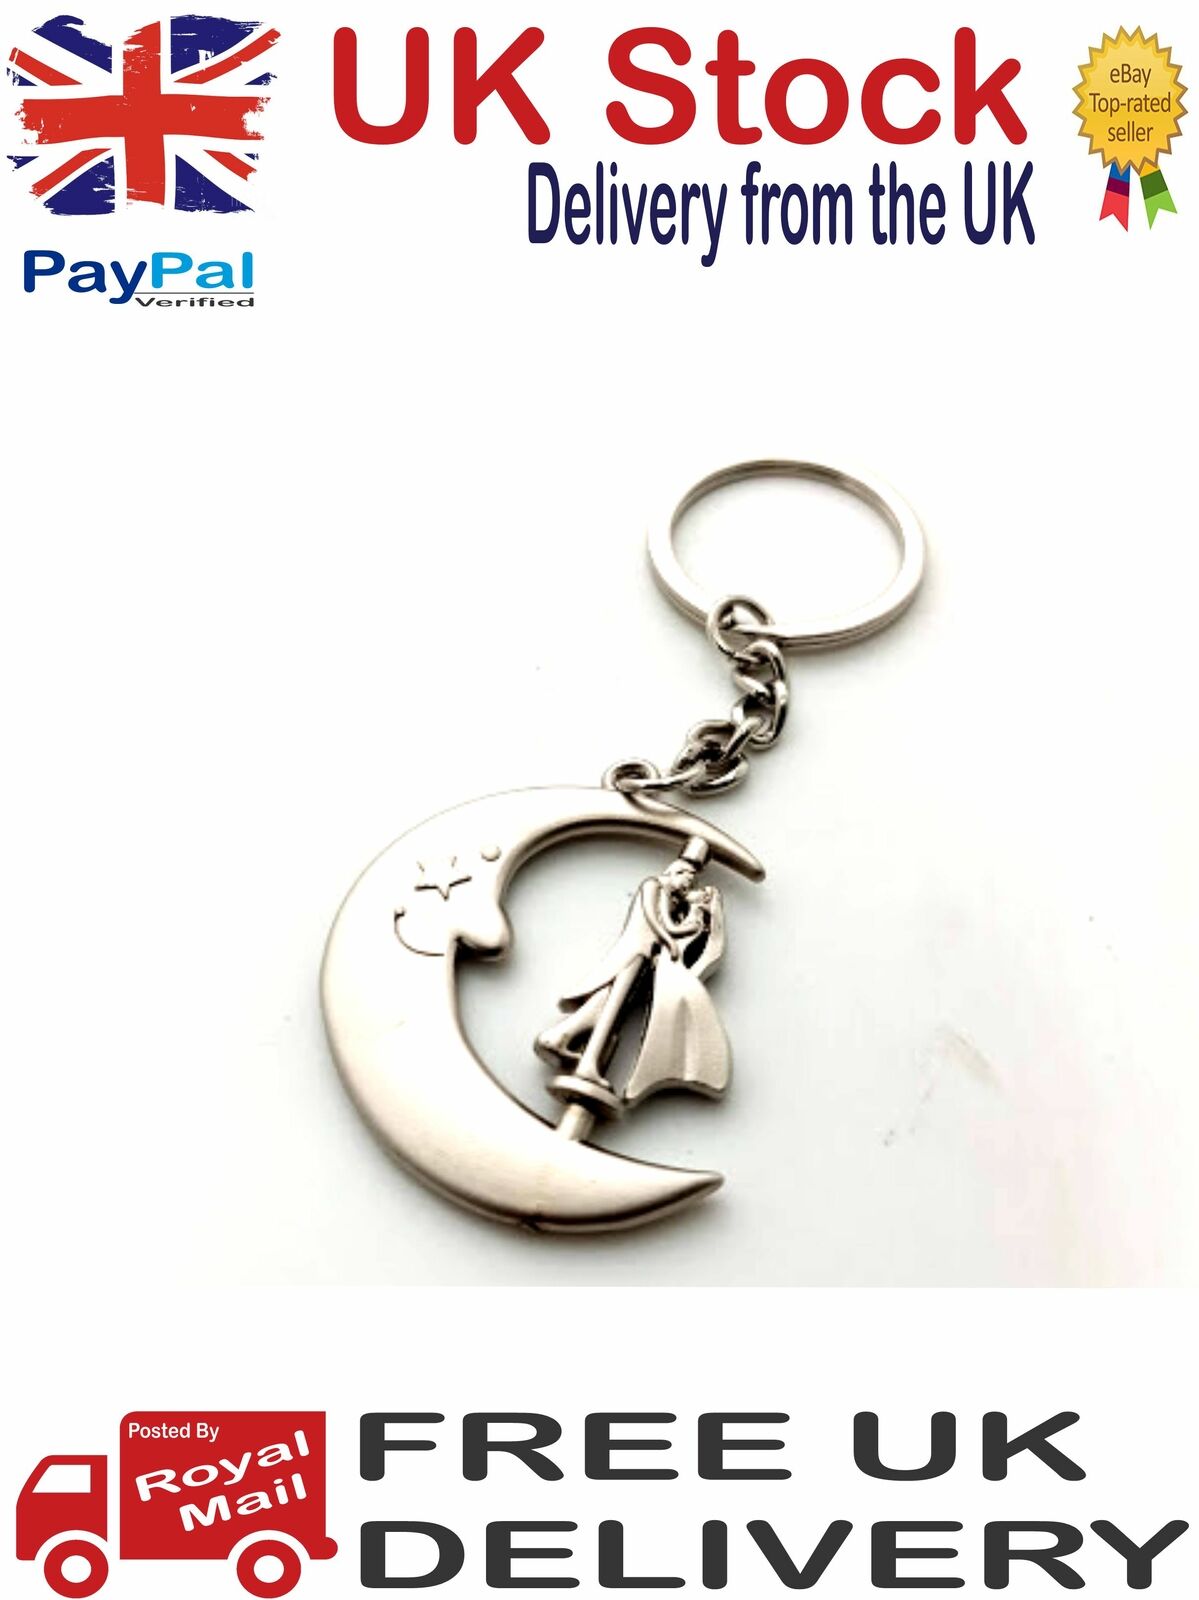 Stylish Metal Antique Double Key Ring Hook / Latest Fashion Detachable Key Rings - Picture 9 of 11